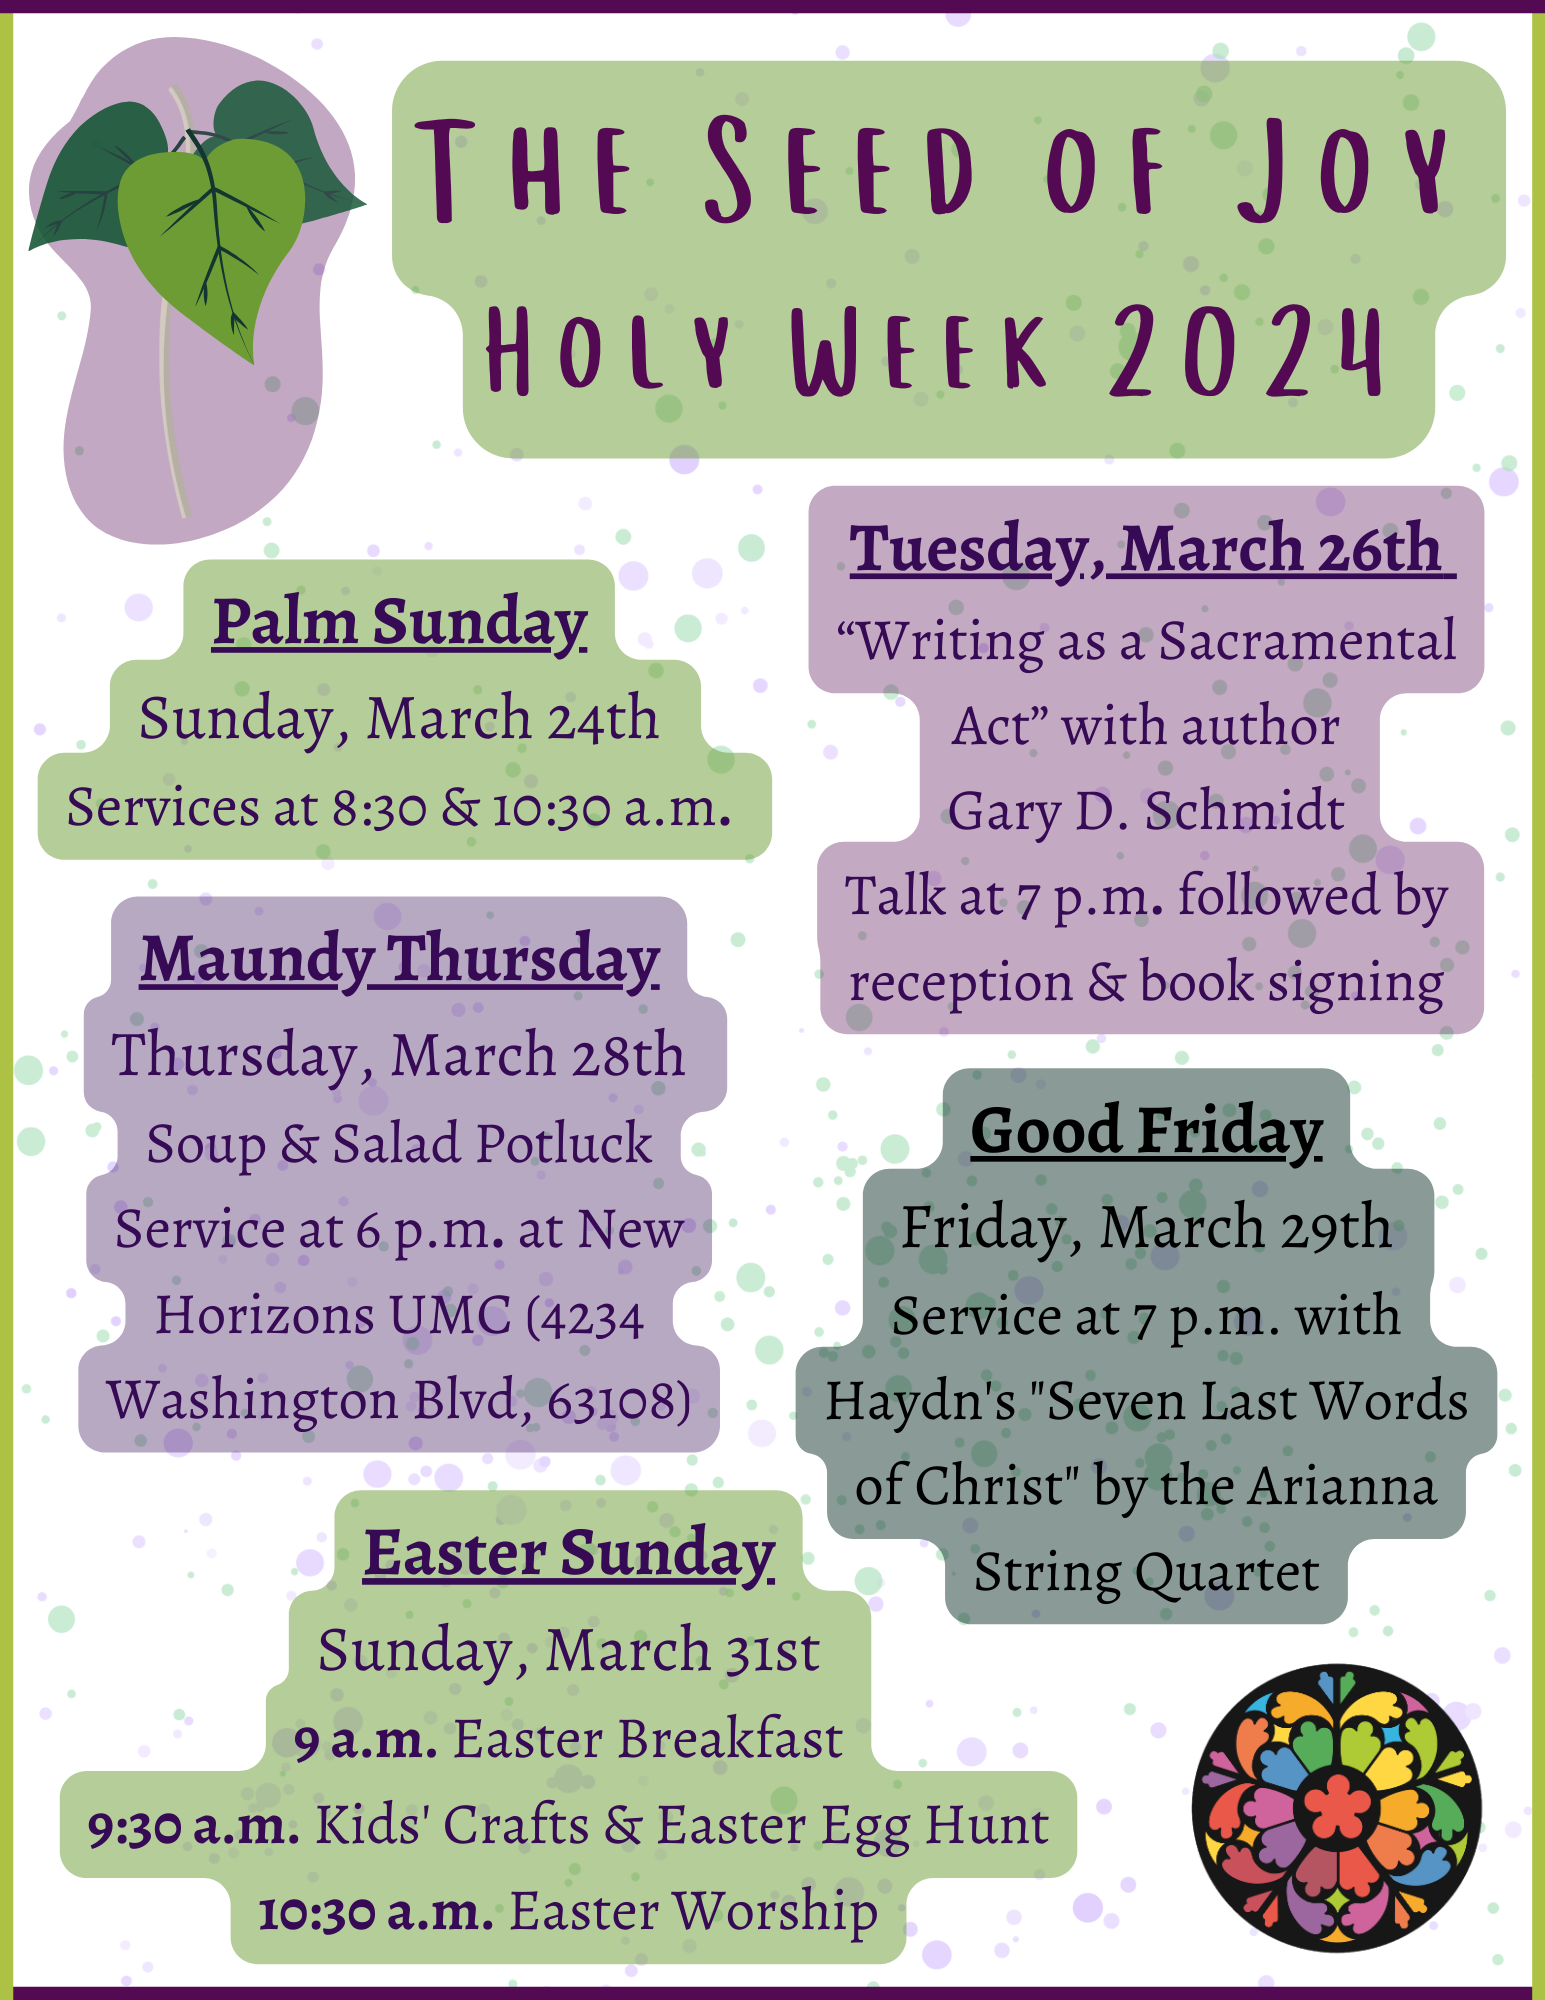 The Seed of Joy
Holy Week 2024
Palm Sunday
March 24th
Services at 8:30 & 10:30am
Tuesday, March 24th
